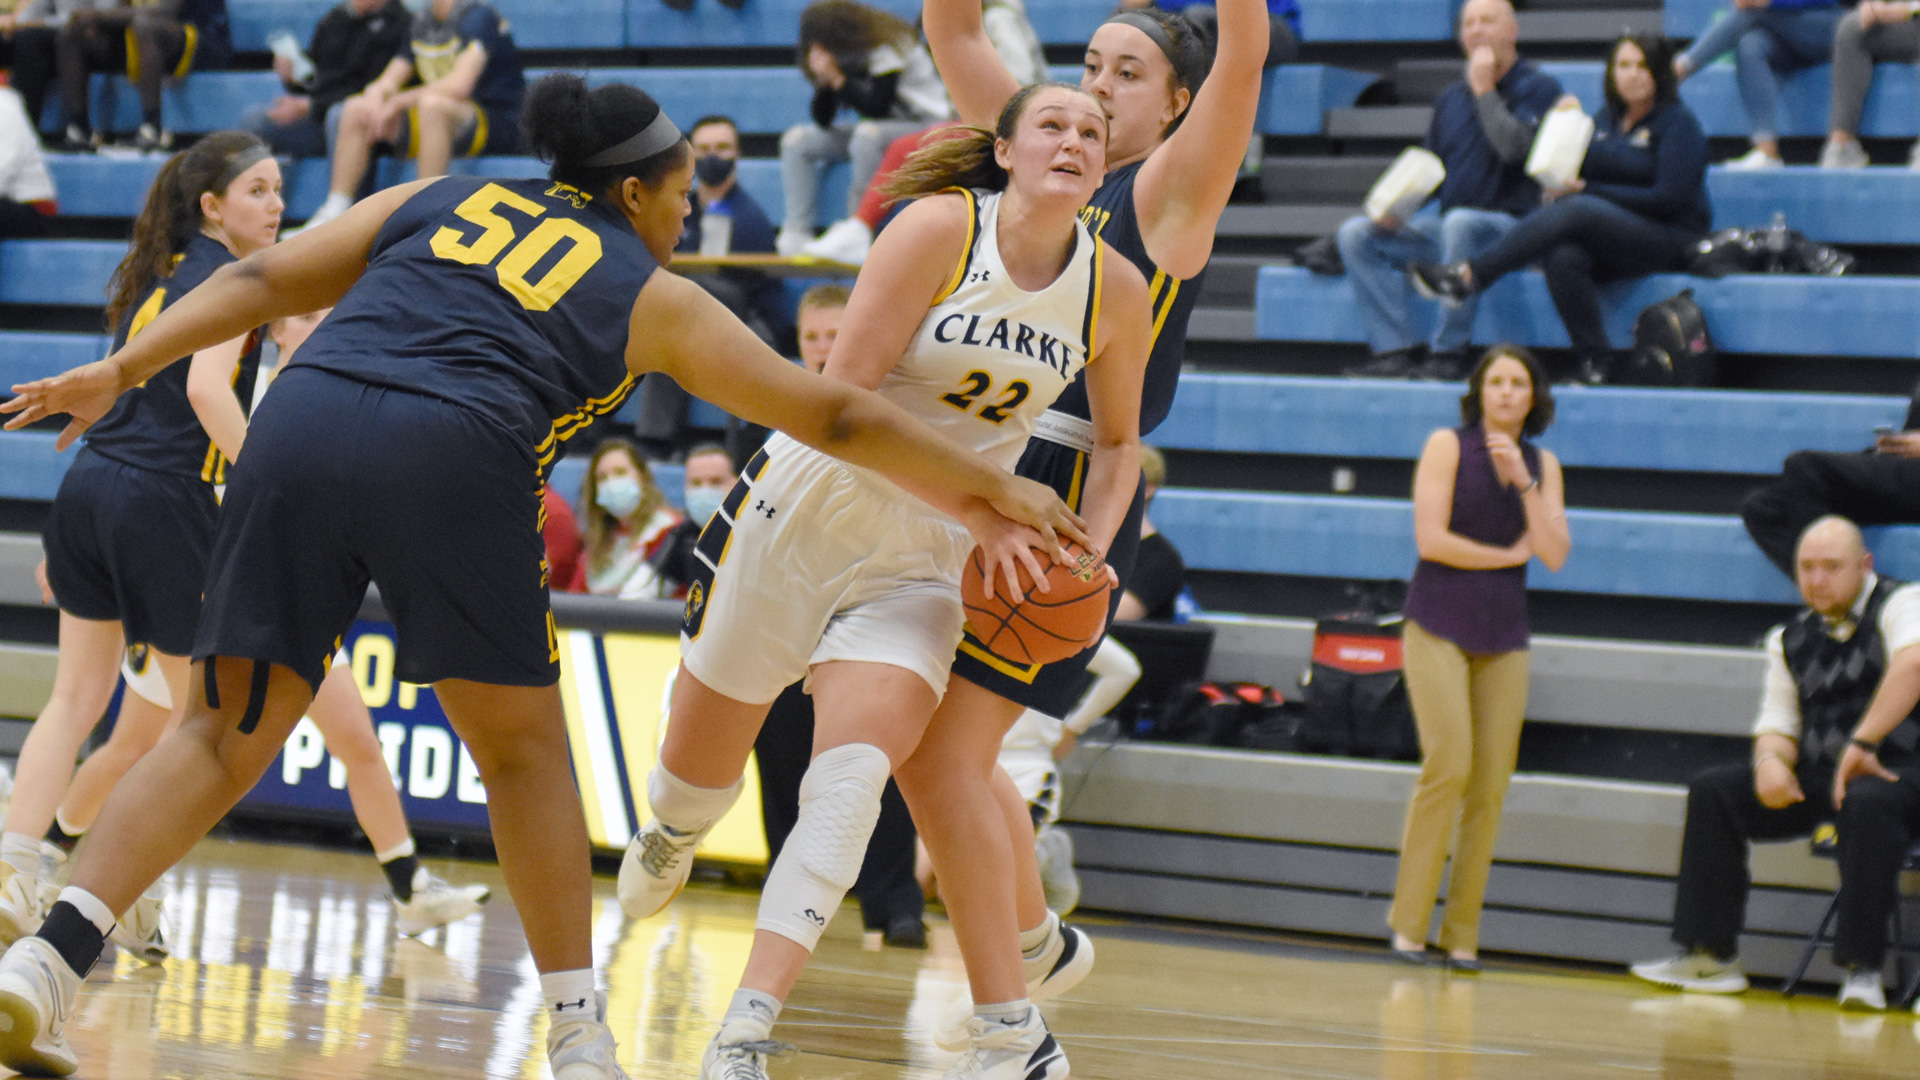 Clarke's Emma Kelchen making a move to the basket against defenders